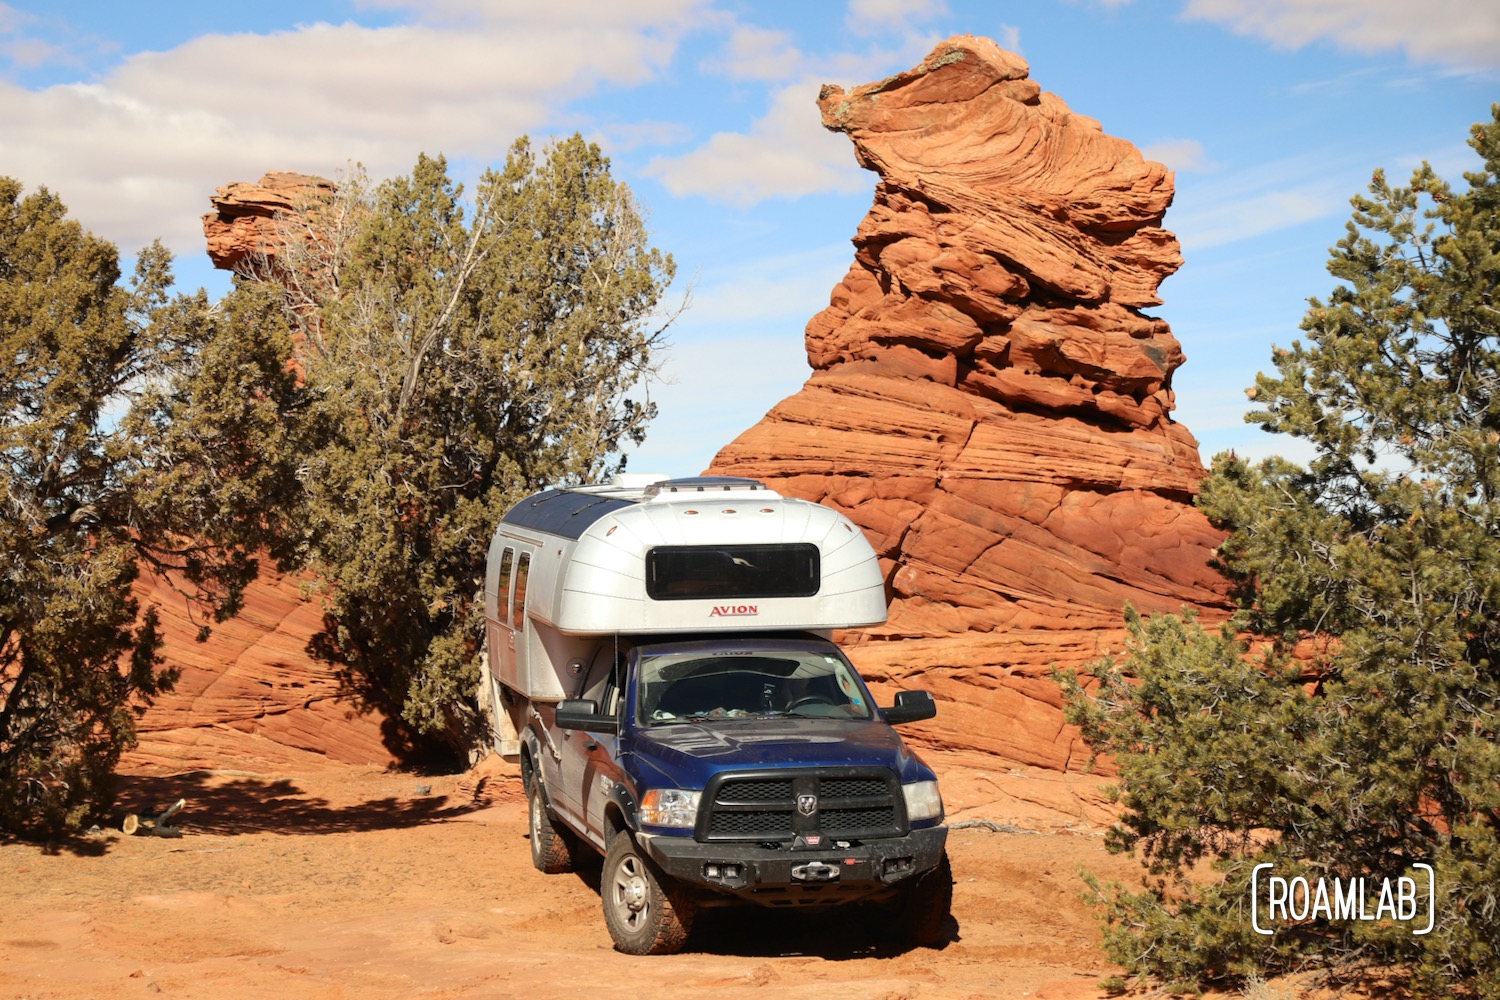 1970 Avion C11 truck camper parked next to a red rock hoodoo in Vermillion Hills National Monument.